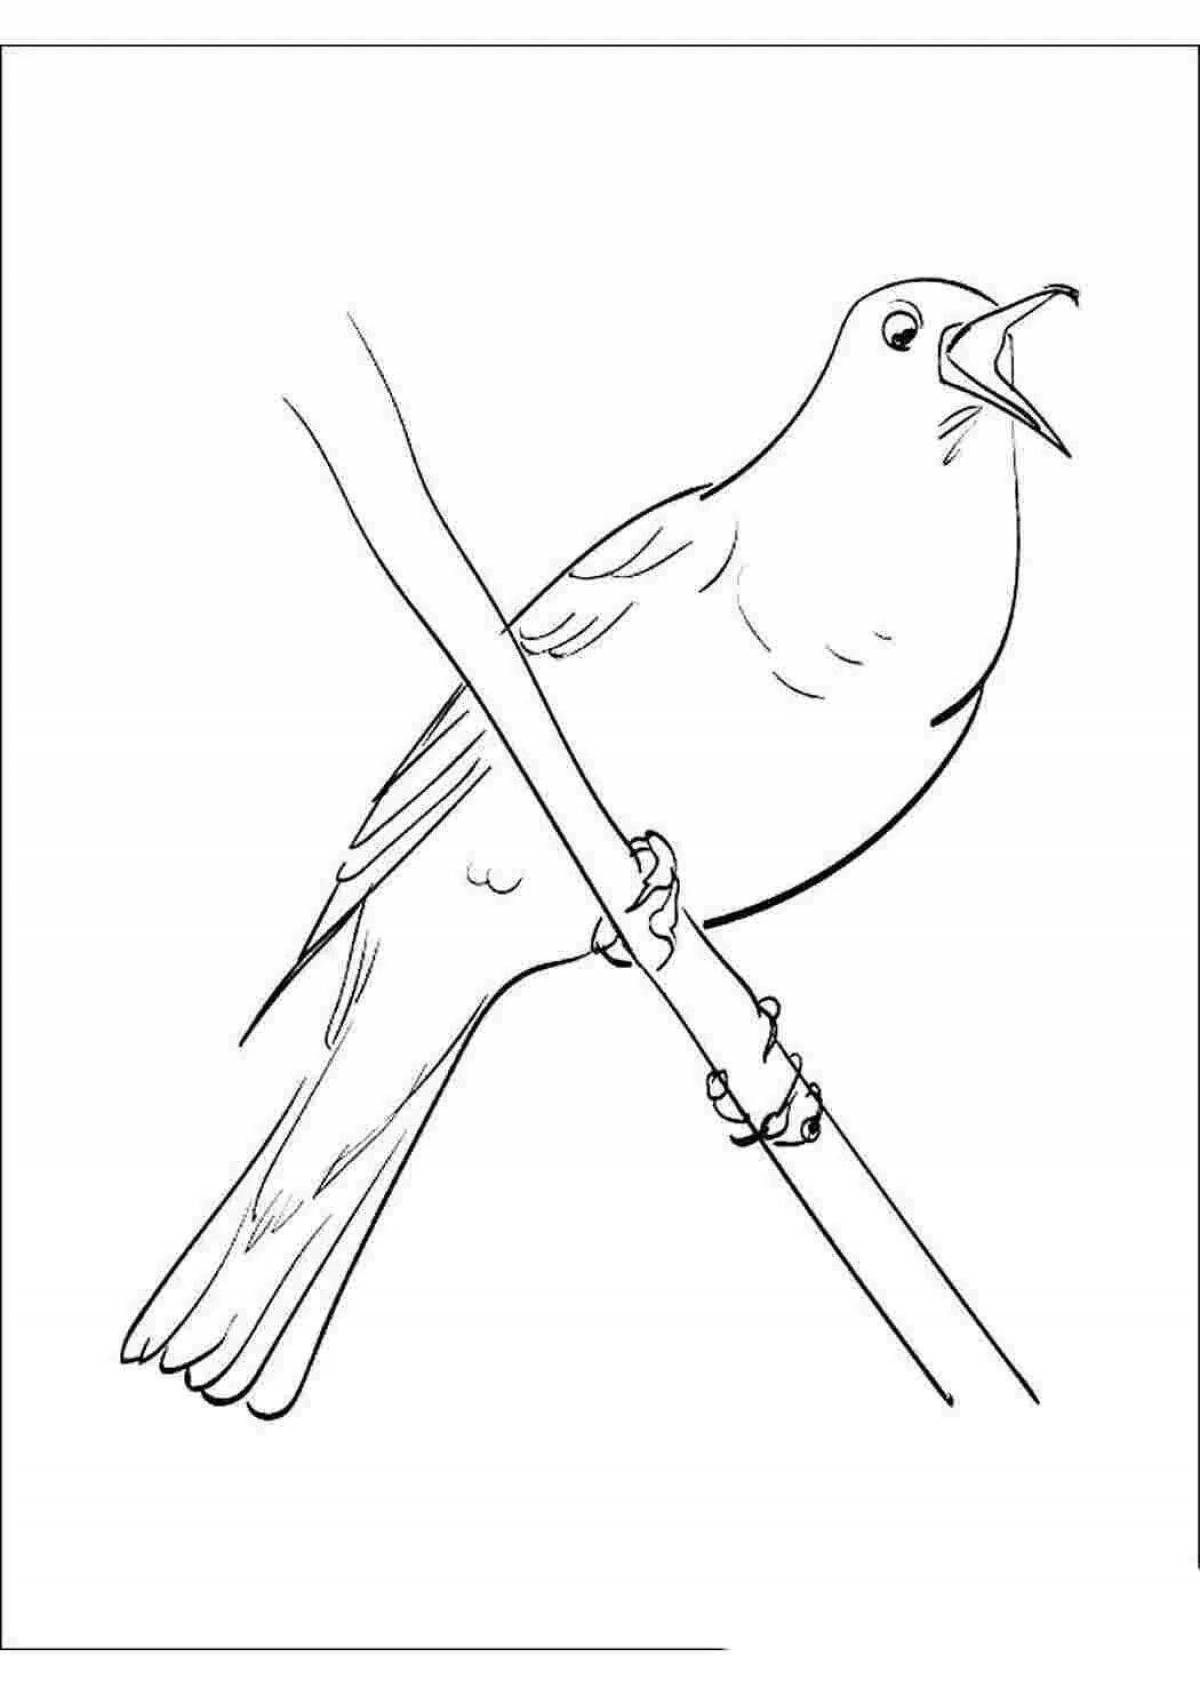 Exquisite nightingale coloring book for kids